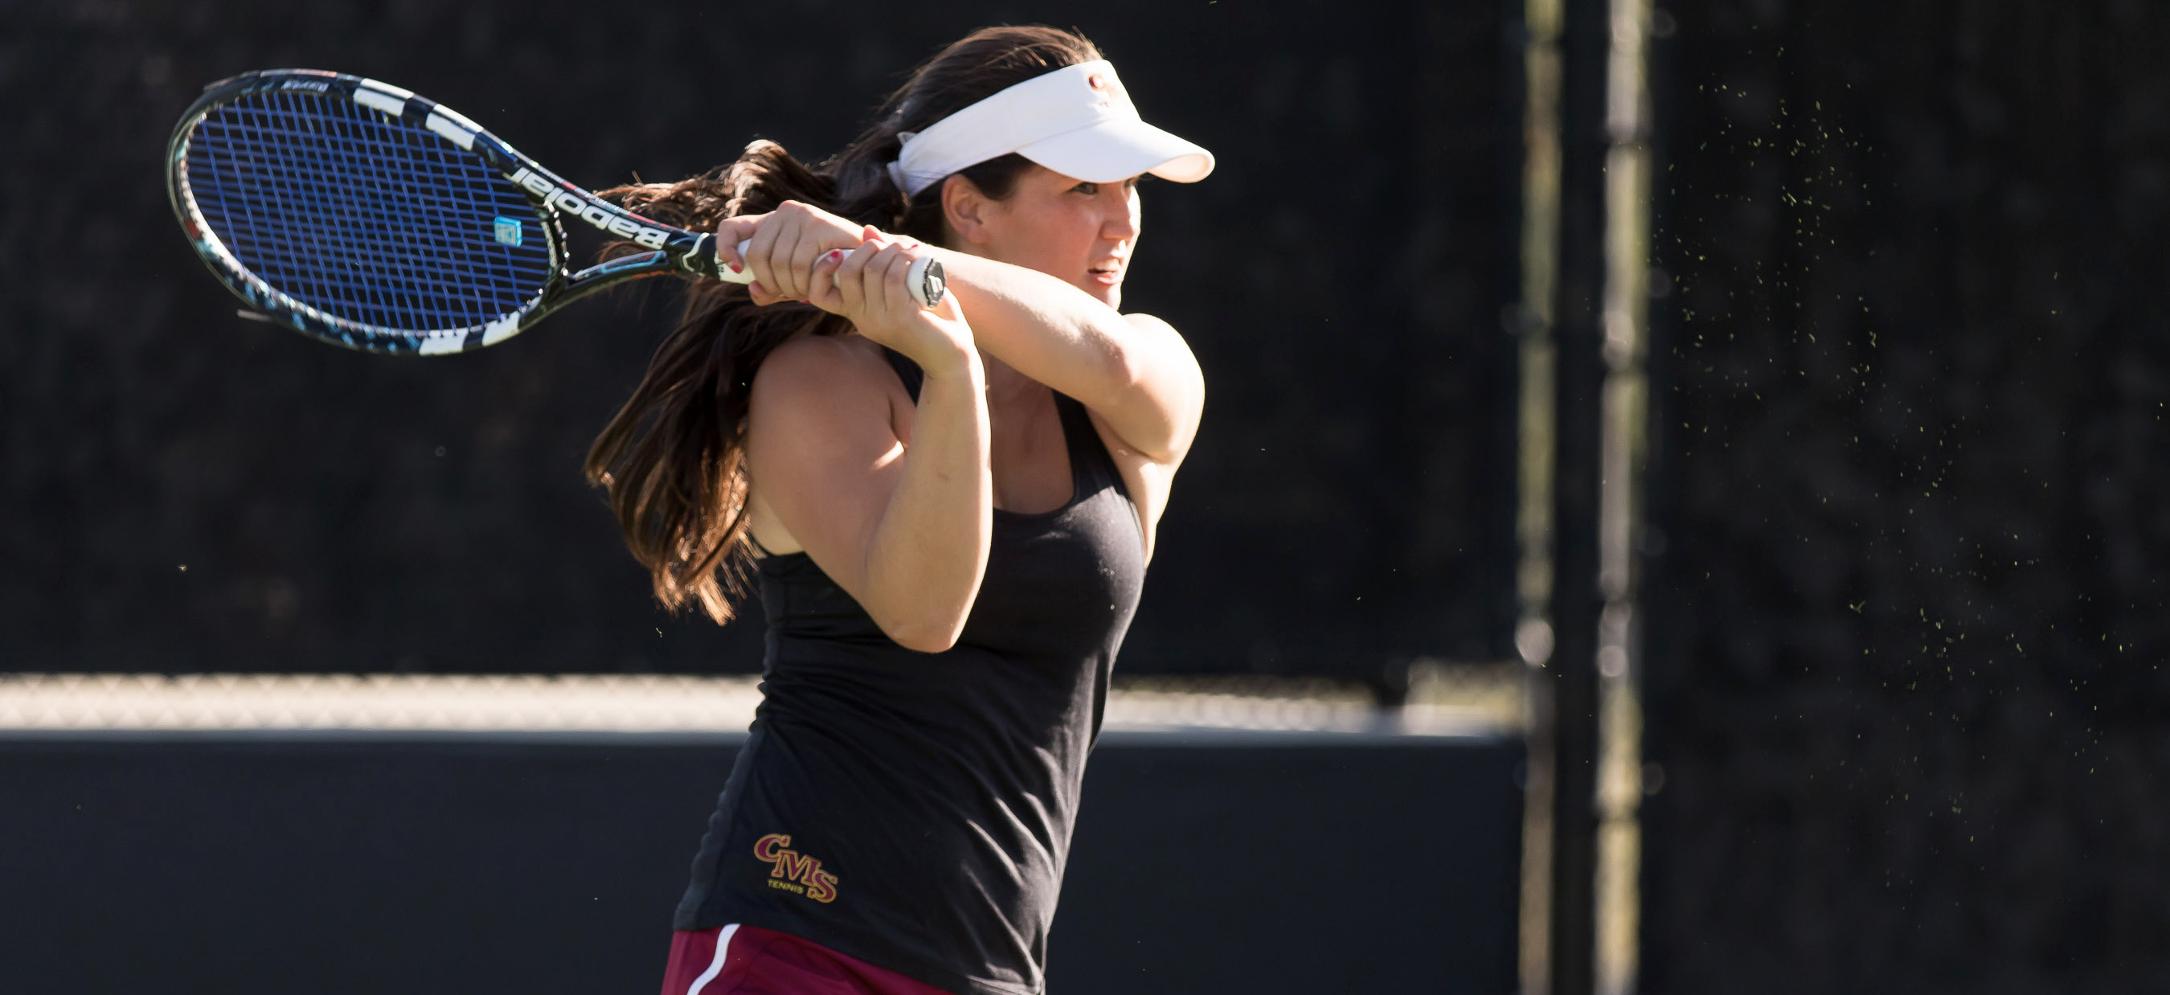 Match Notes: 2016 NCAA Division III Women's Tennis Championships - Final Rounds